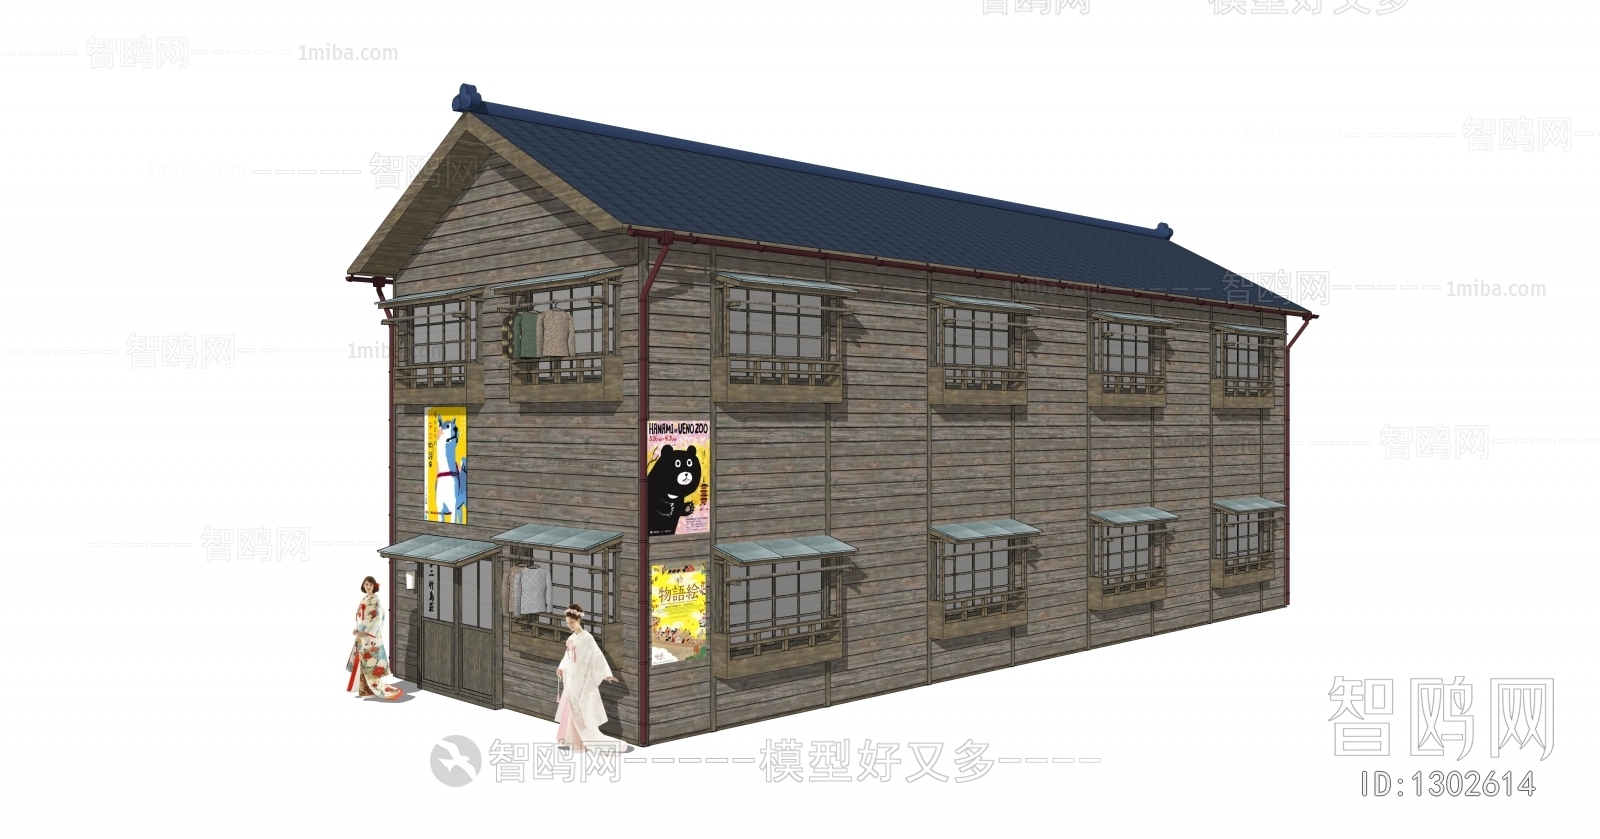 Japanese Style Building Appearance